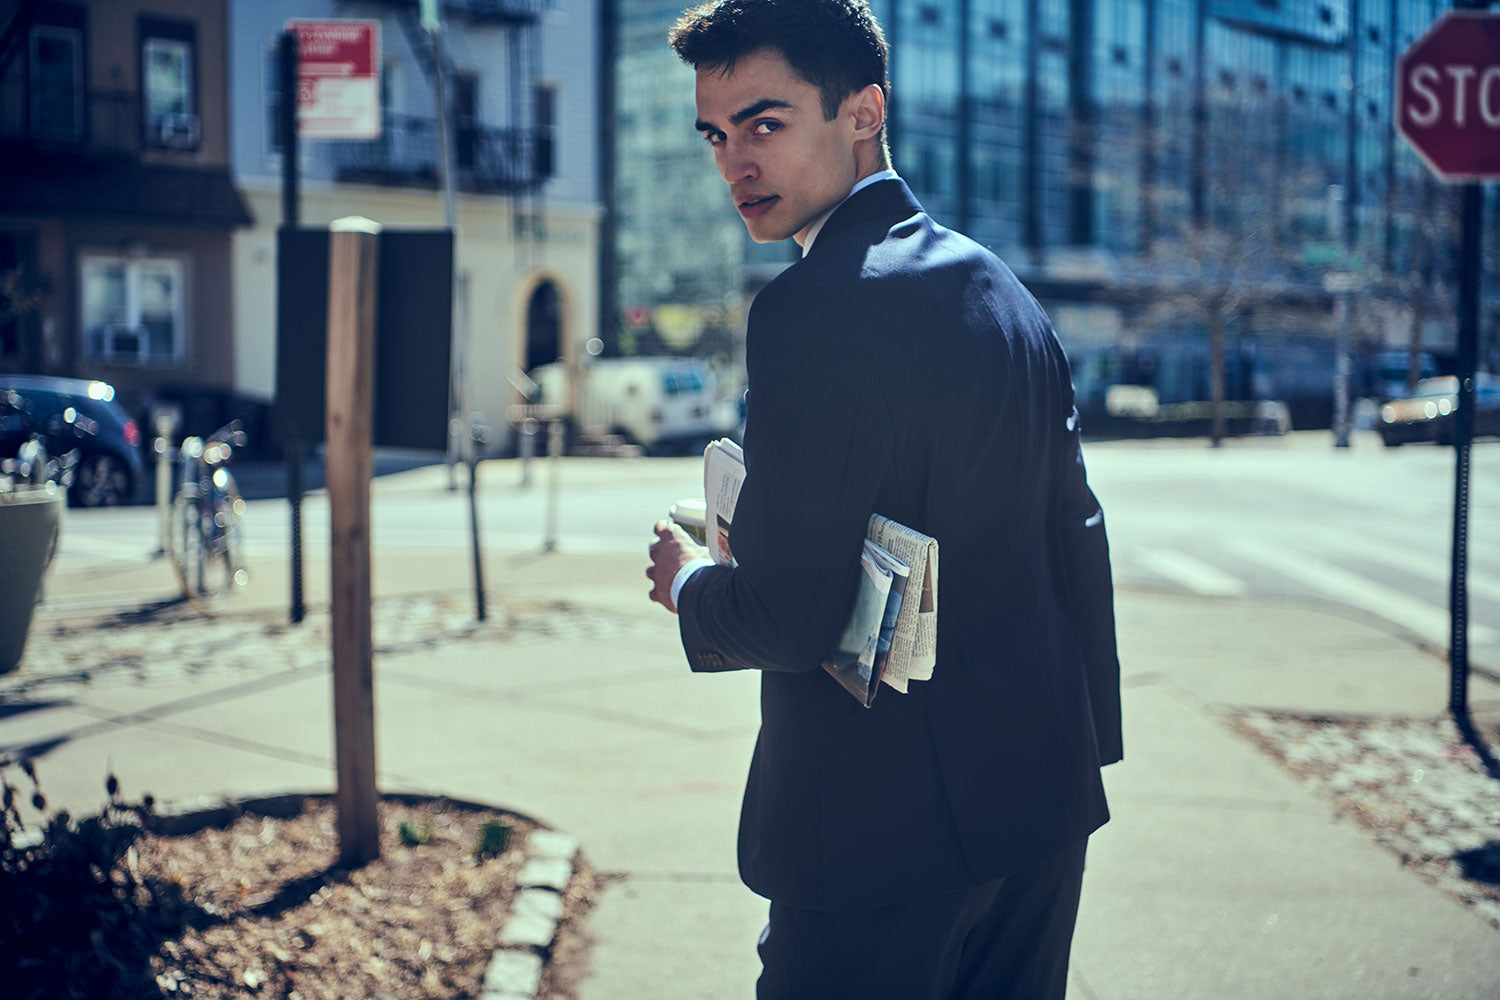 Model wears a navy suit. He is carrying coffee and a newspaper under his arm. He is shot from the back, looking over his shoulder.